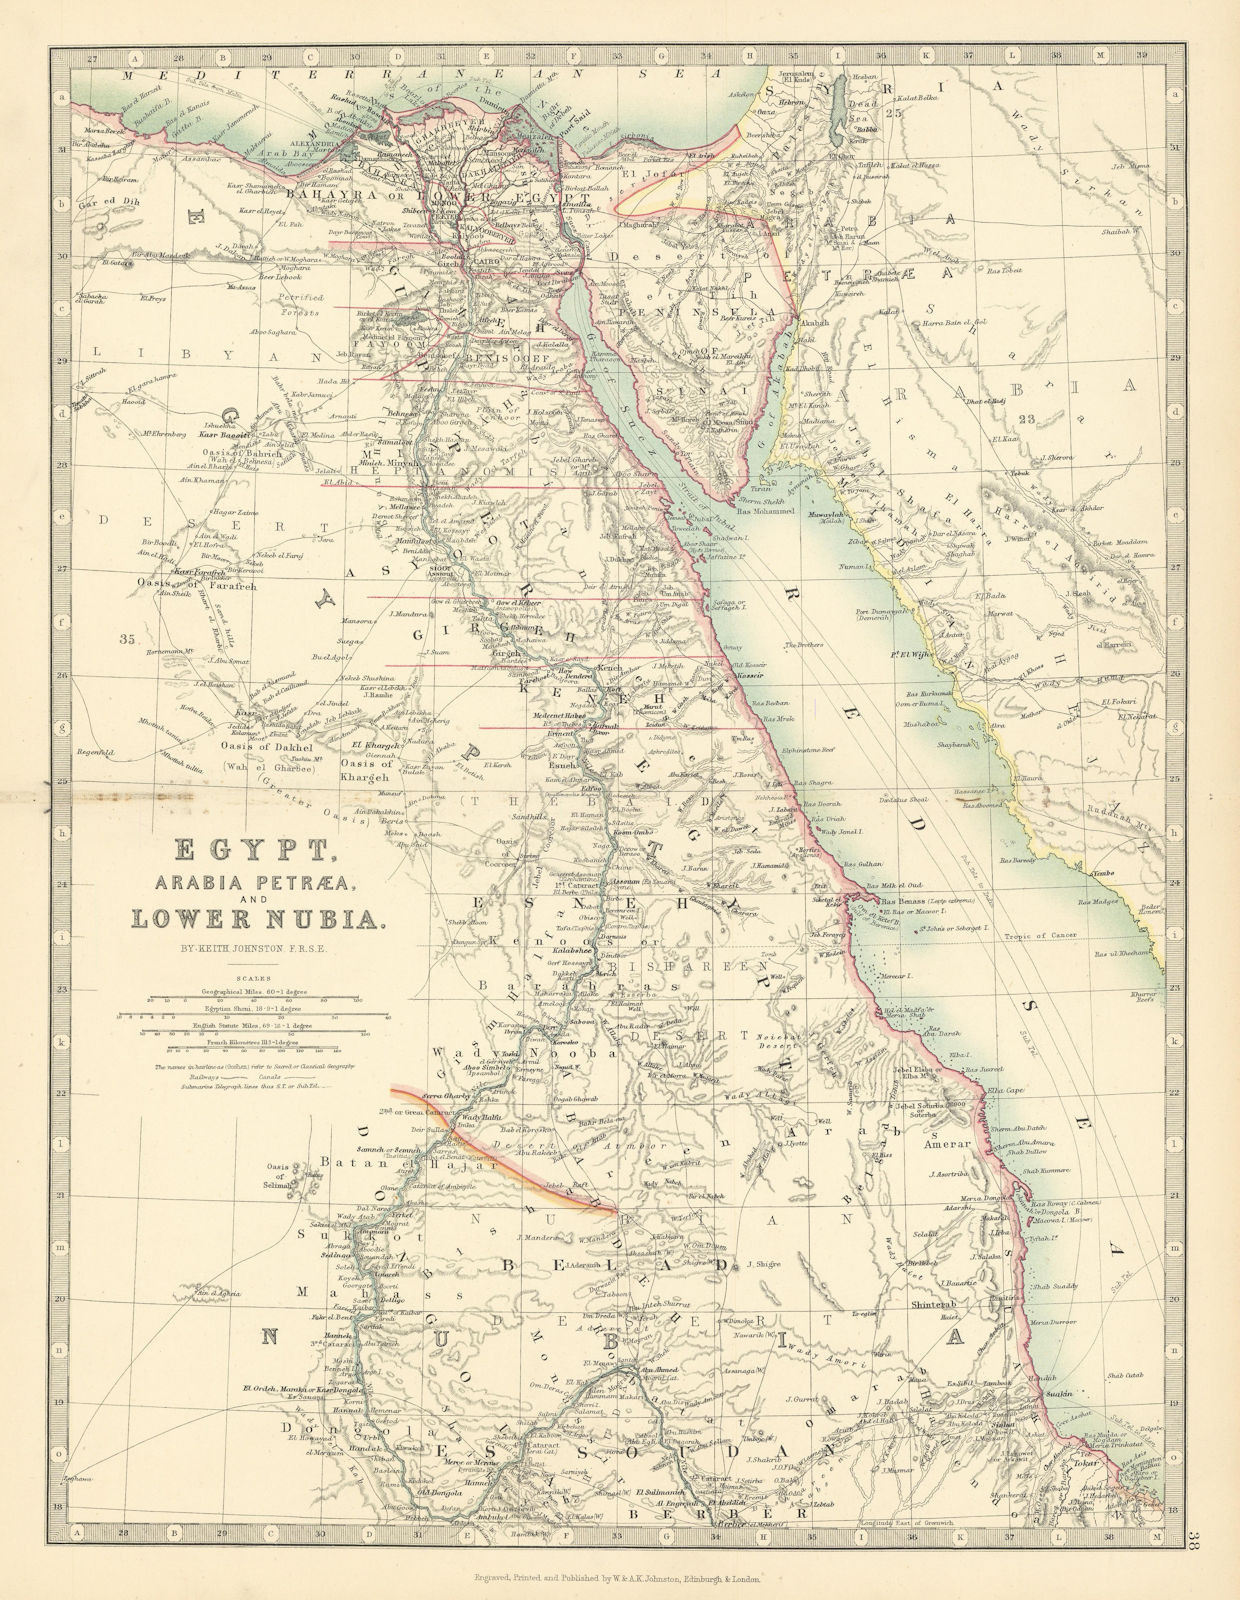 Associate Product NILE VALLEY Egypt, Arabia Petraea and Lower Nubia Divisions JOHNSTON 1897 map